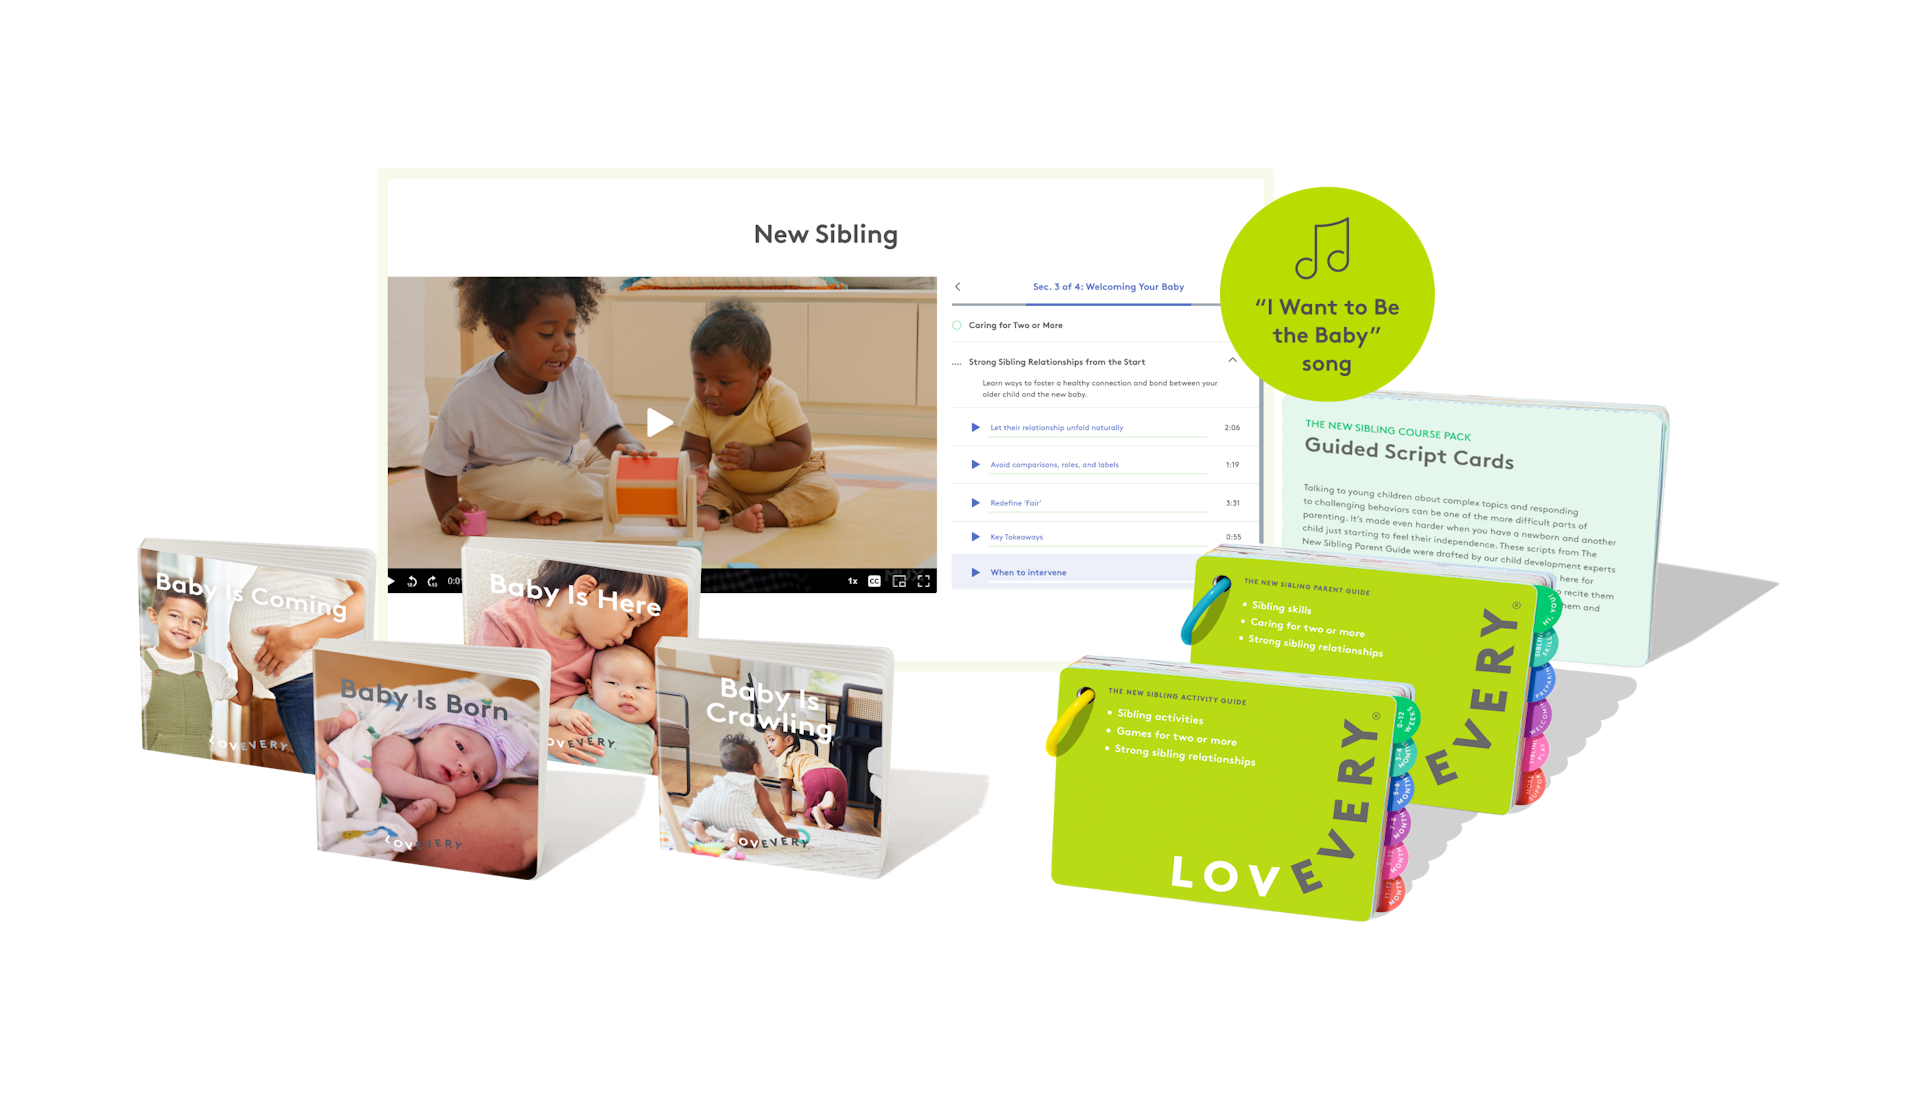 The New Sibling Course by Lovevery